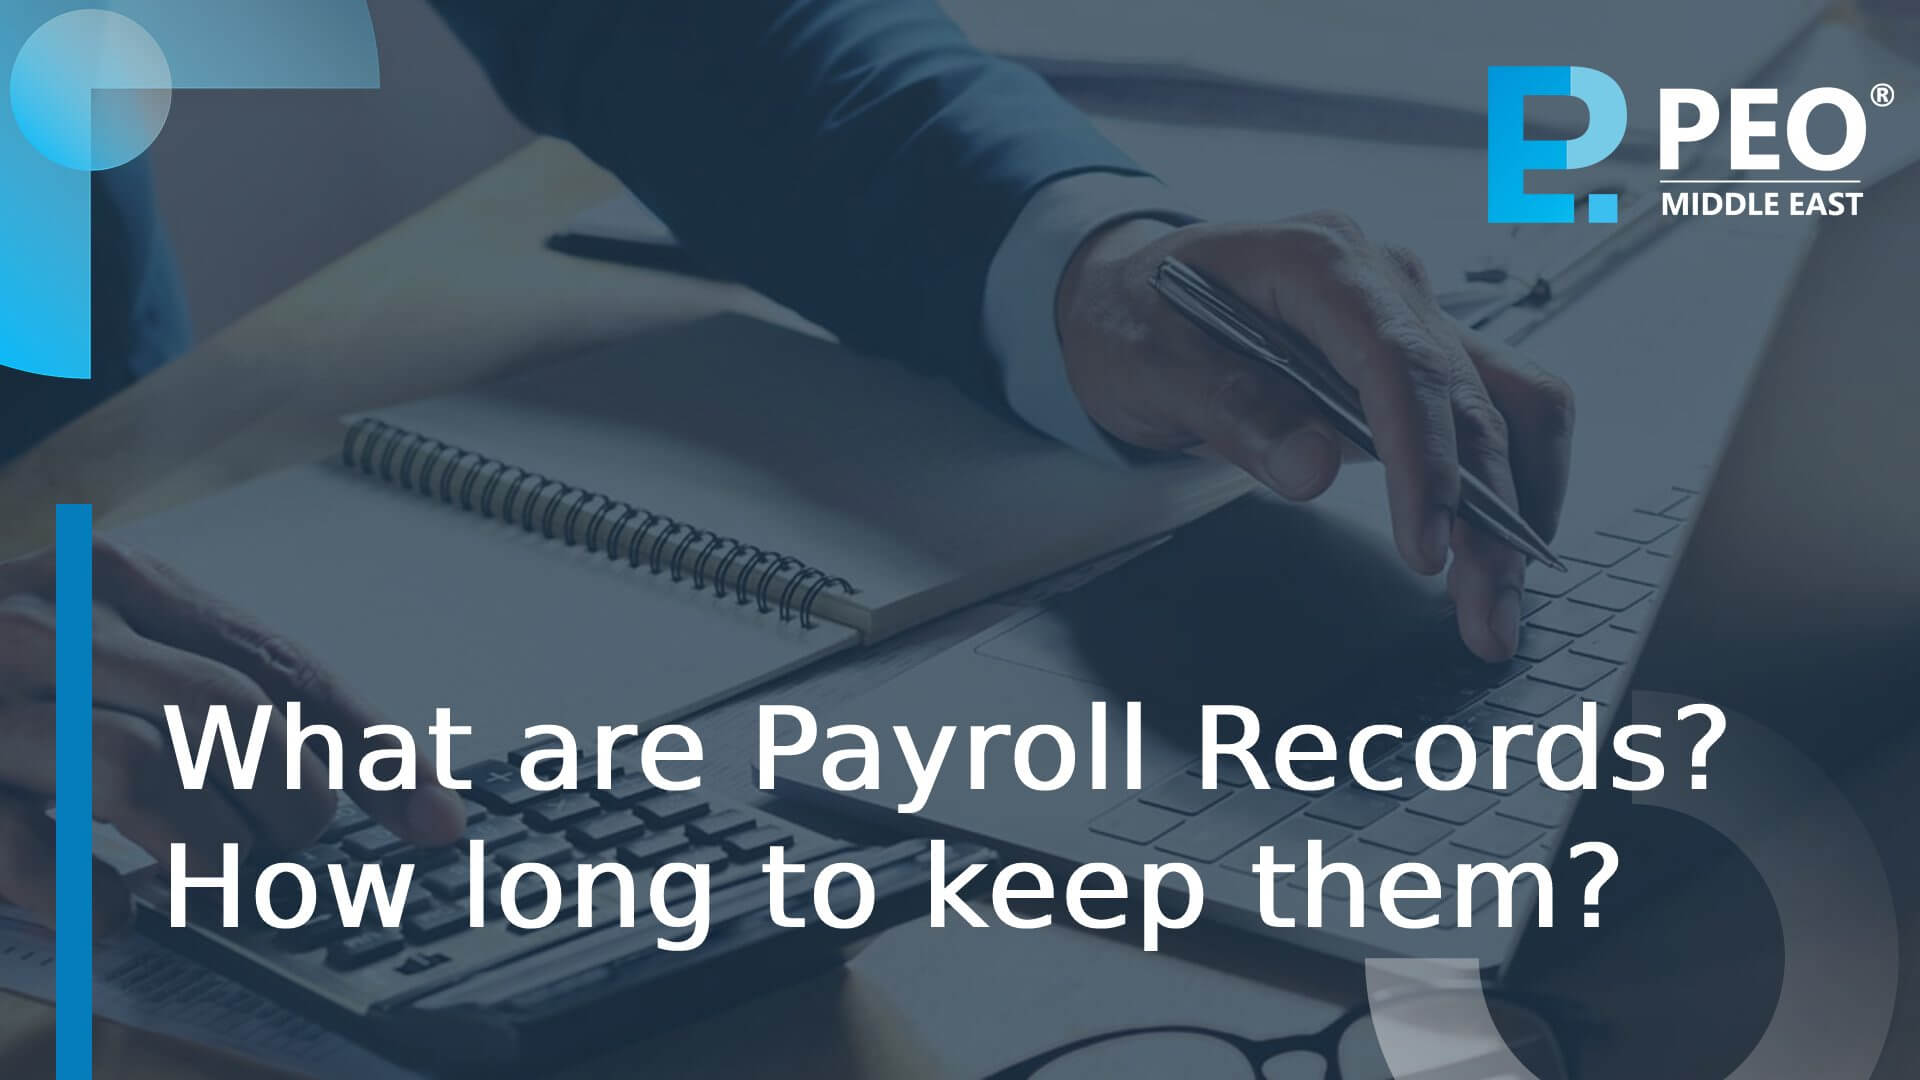 What are Payroll Records? How long to keep them?